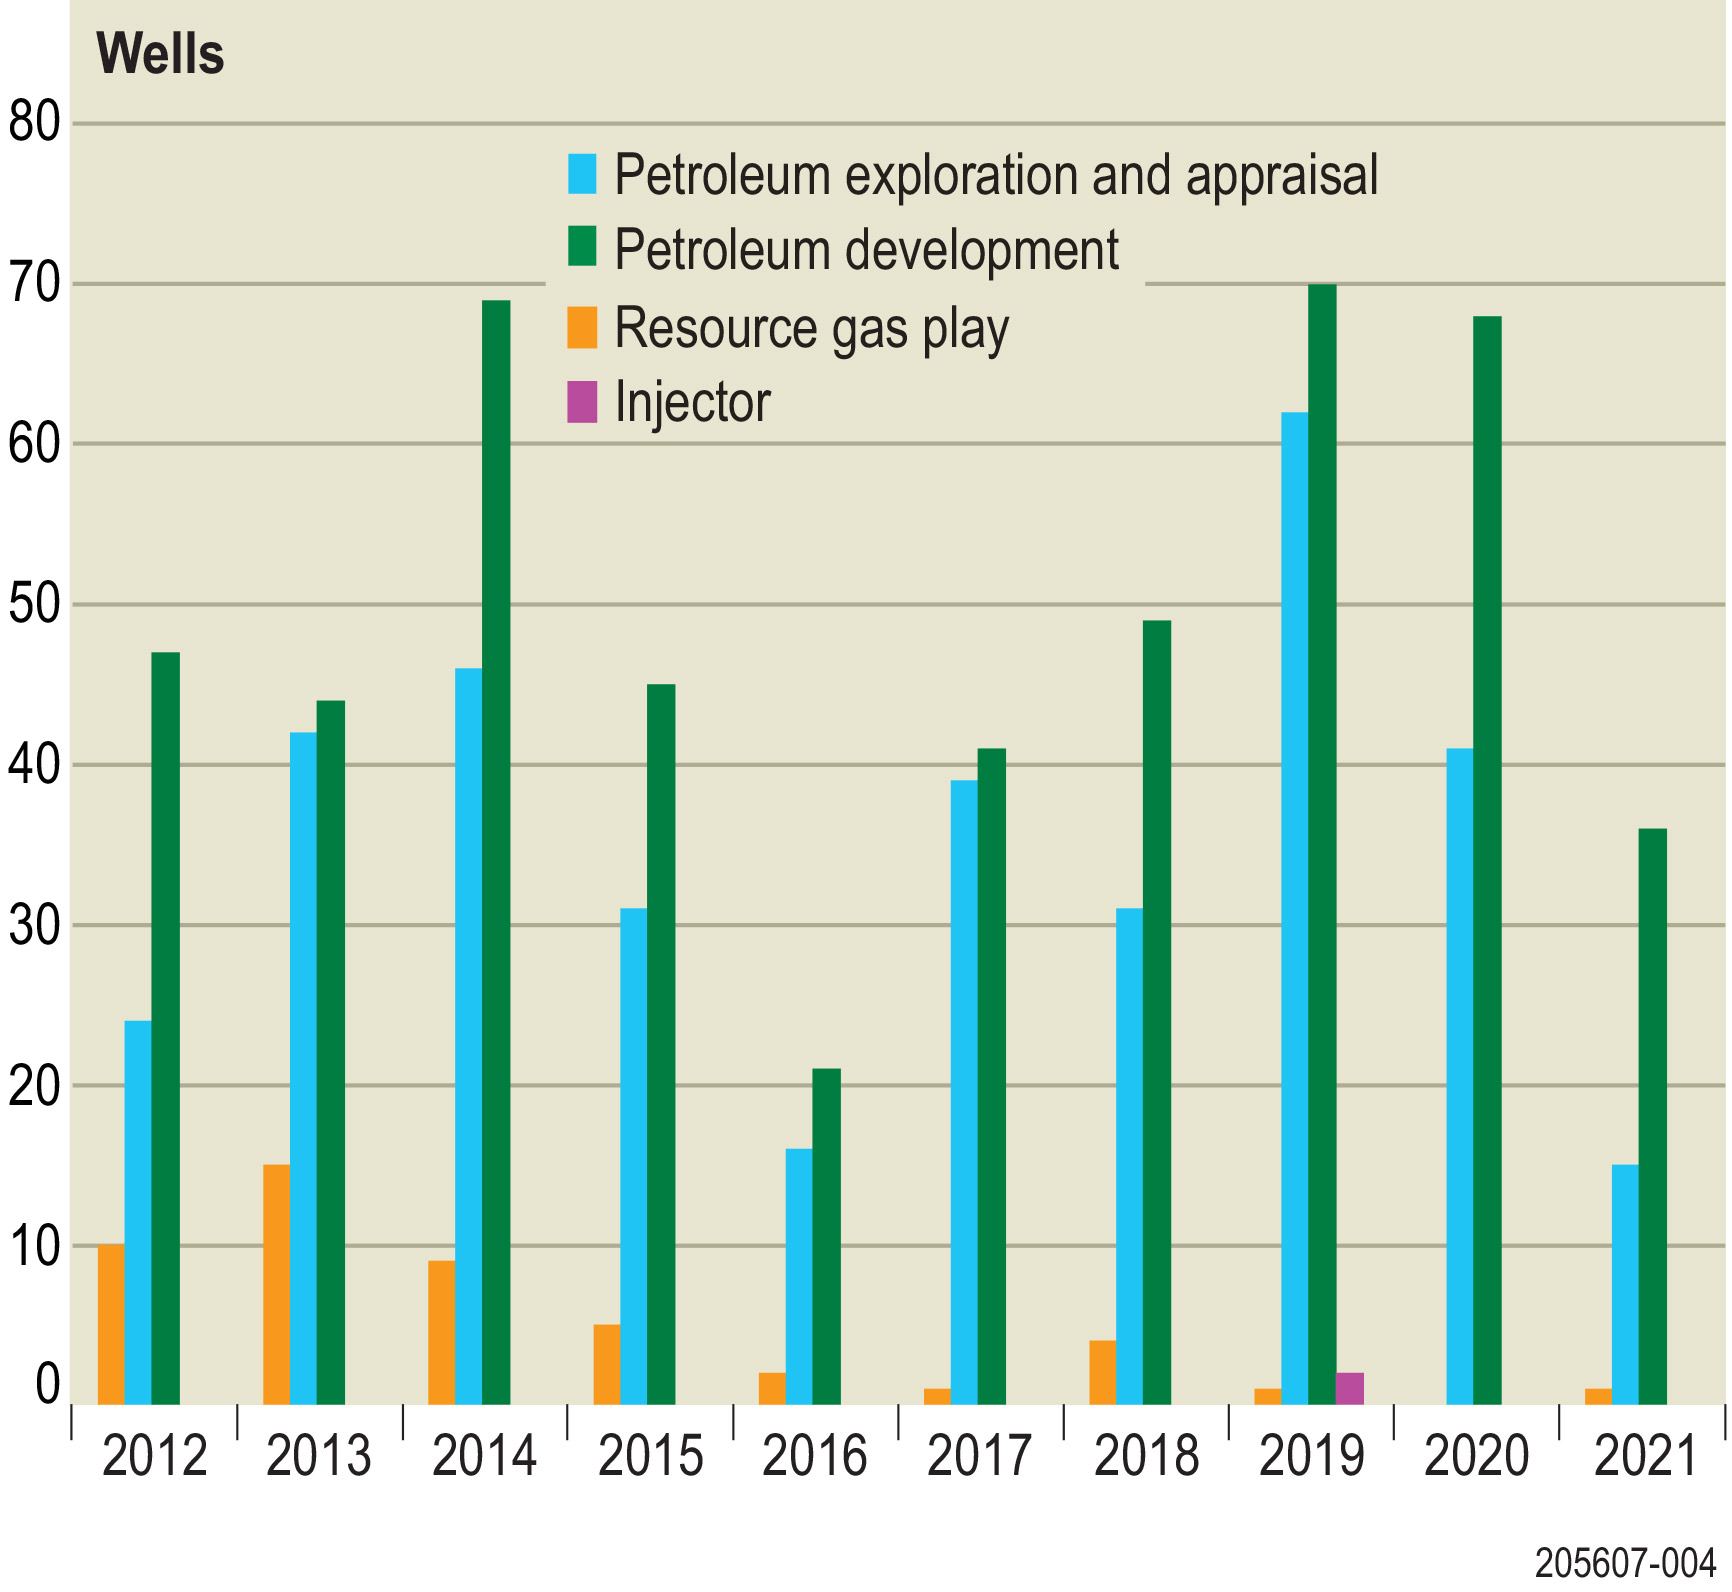 Graph showing number of wells drilled in South Australia between 2012-2021, separated by type of well (exploration and appraisal, development, gas play and injector well).